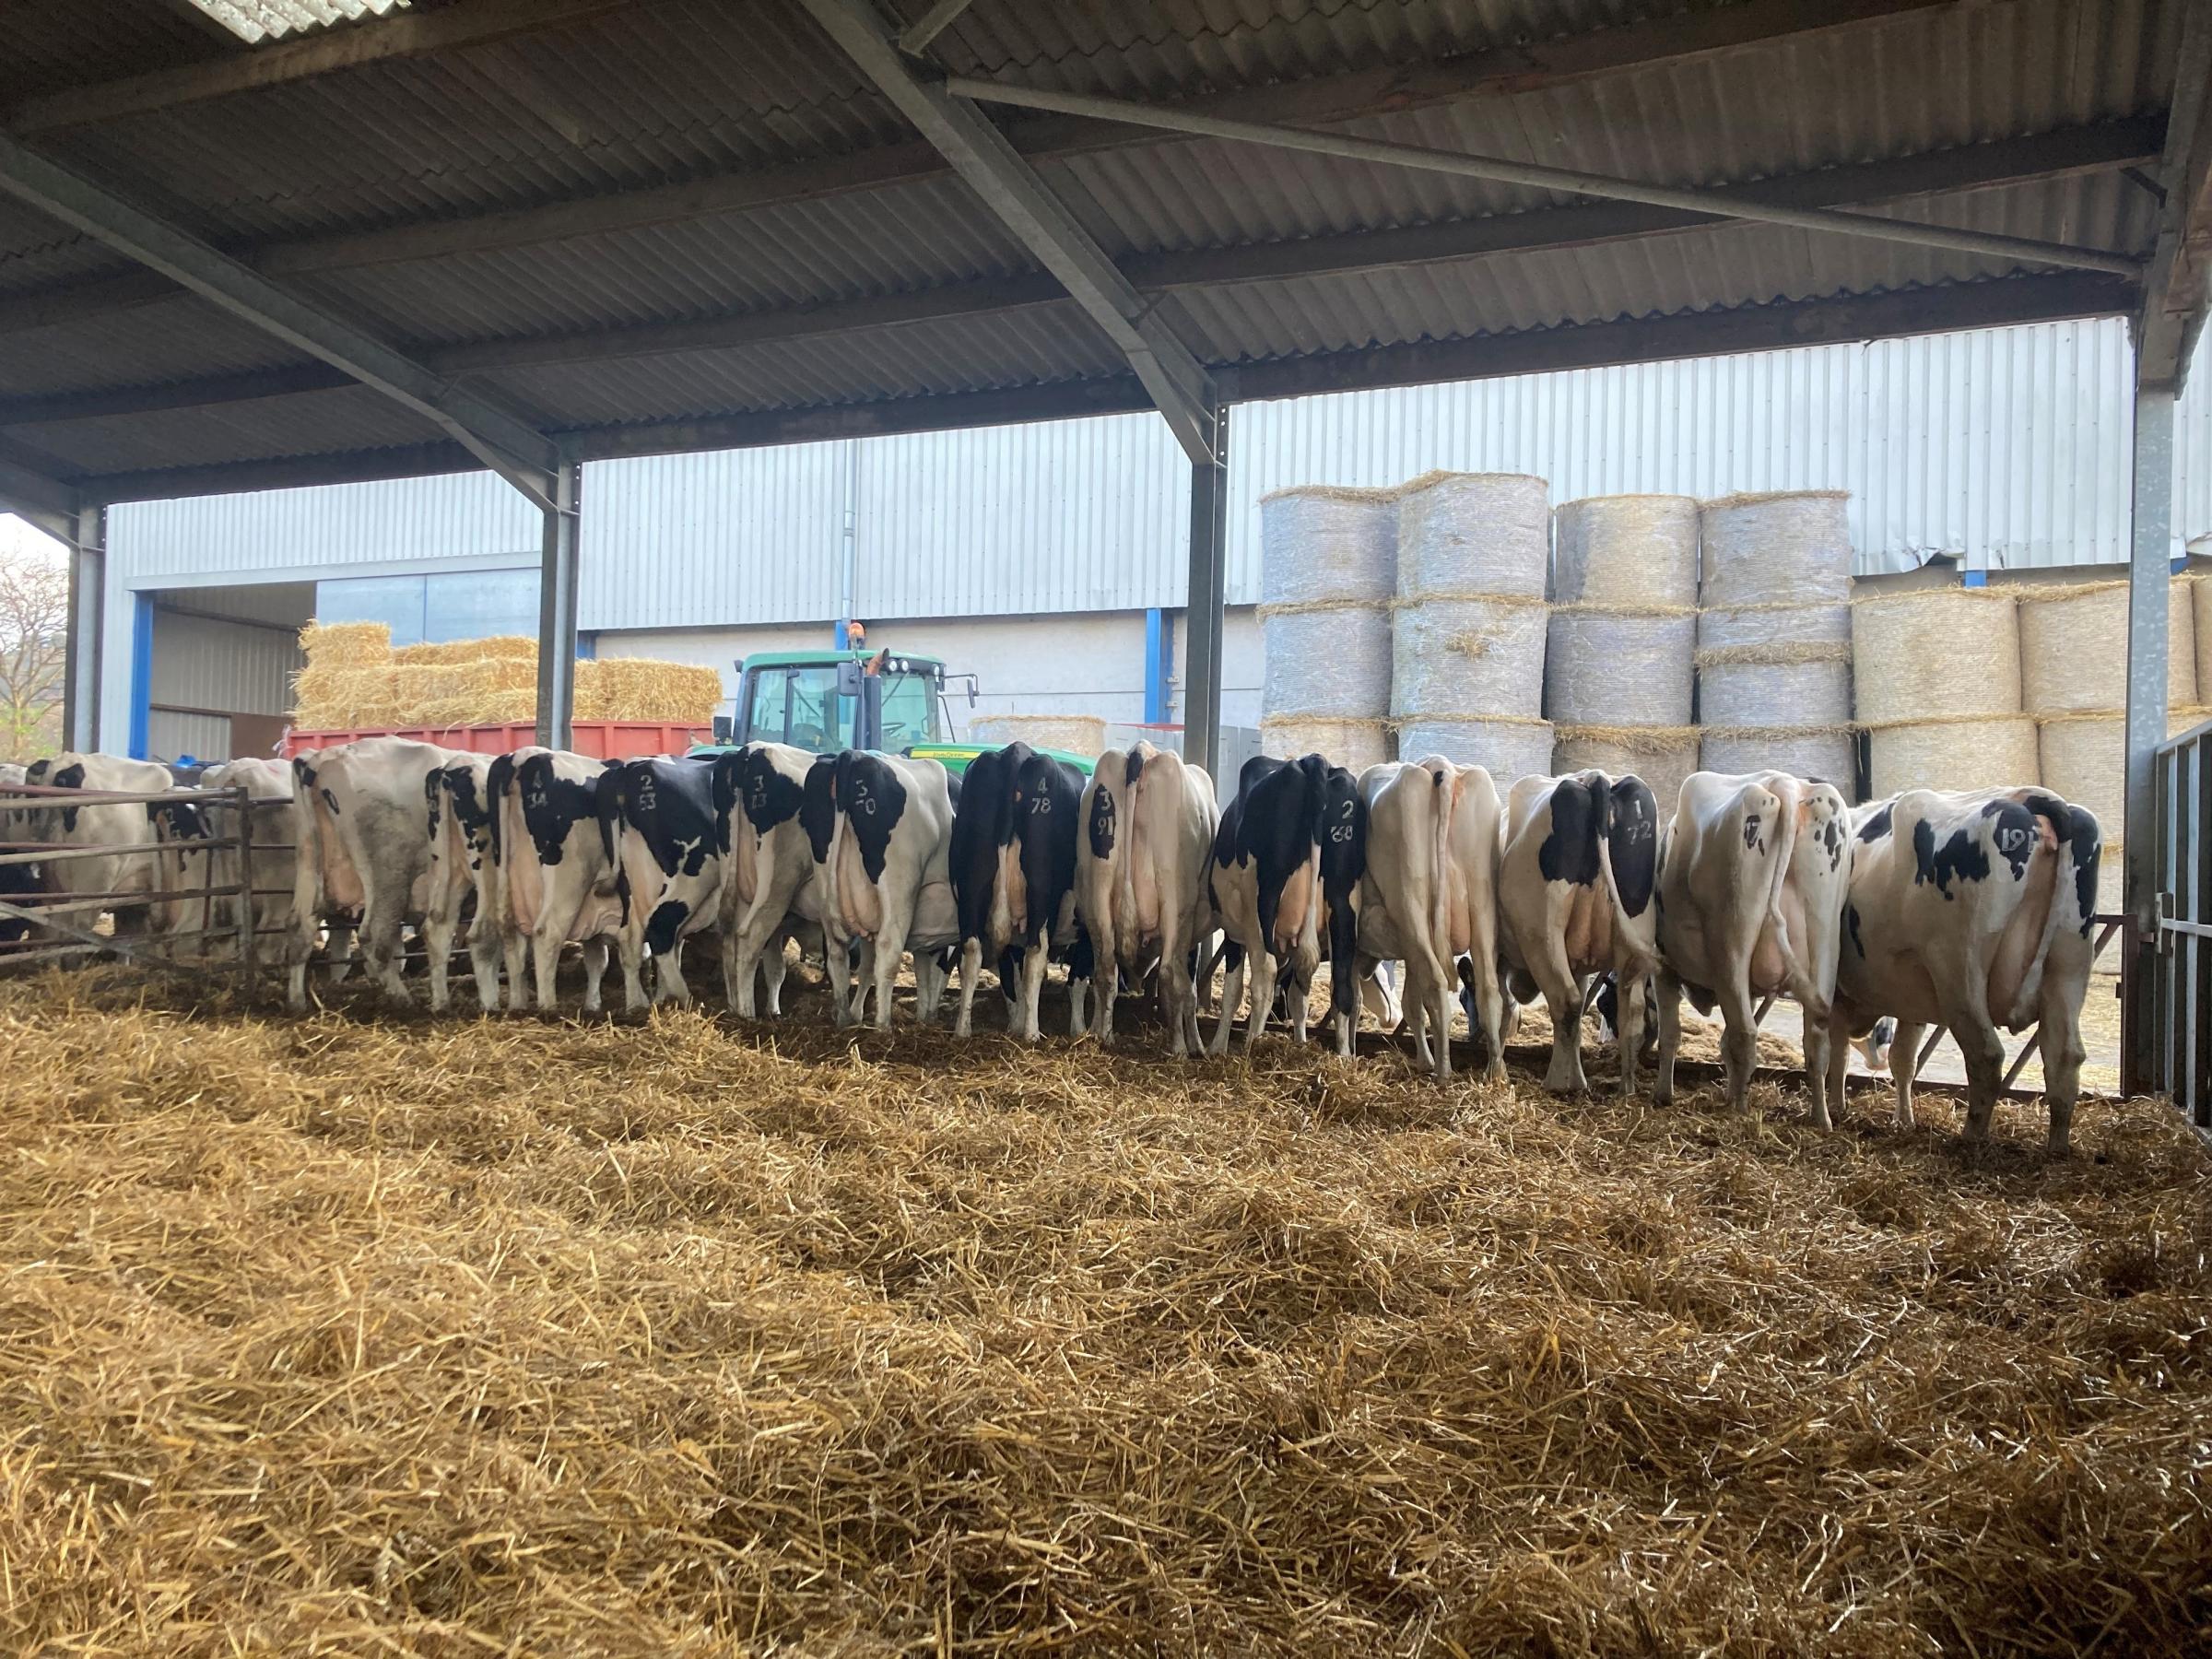 Dry cows at feeding time before the 2021 sale